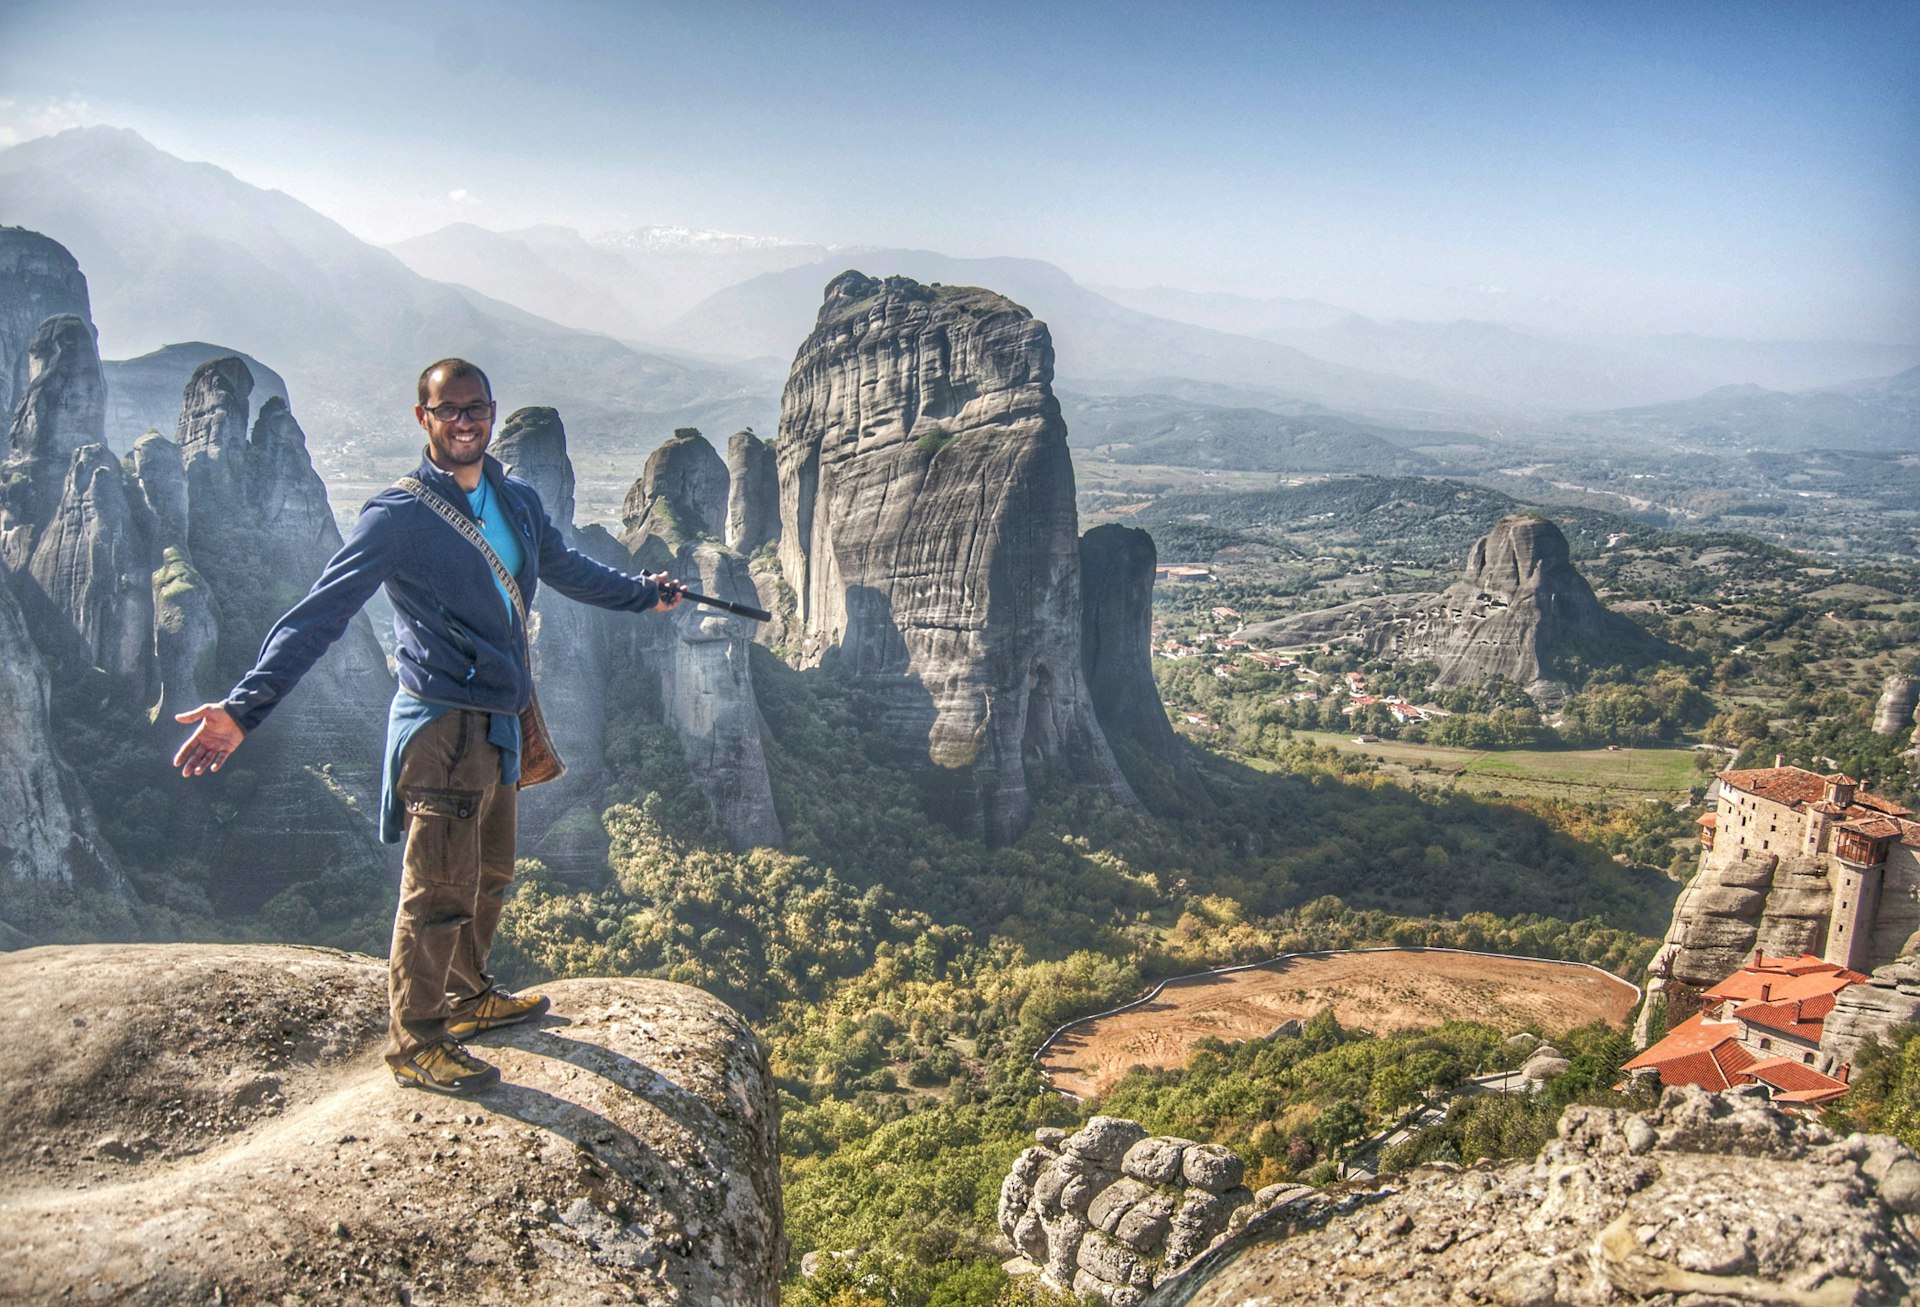 A man stands on a rocky outcrop, clearly delighted at the view that stretches into the distance with peaks topped with monasteries